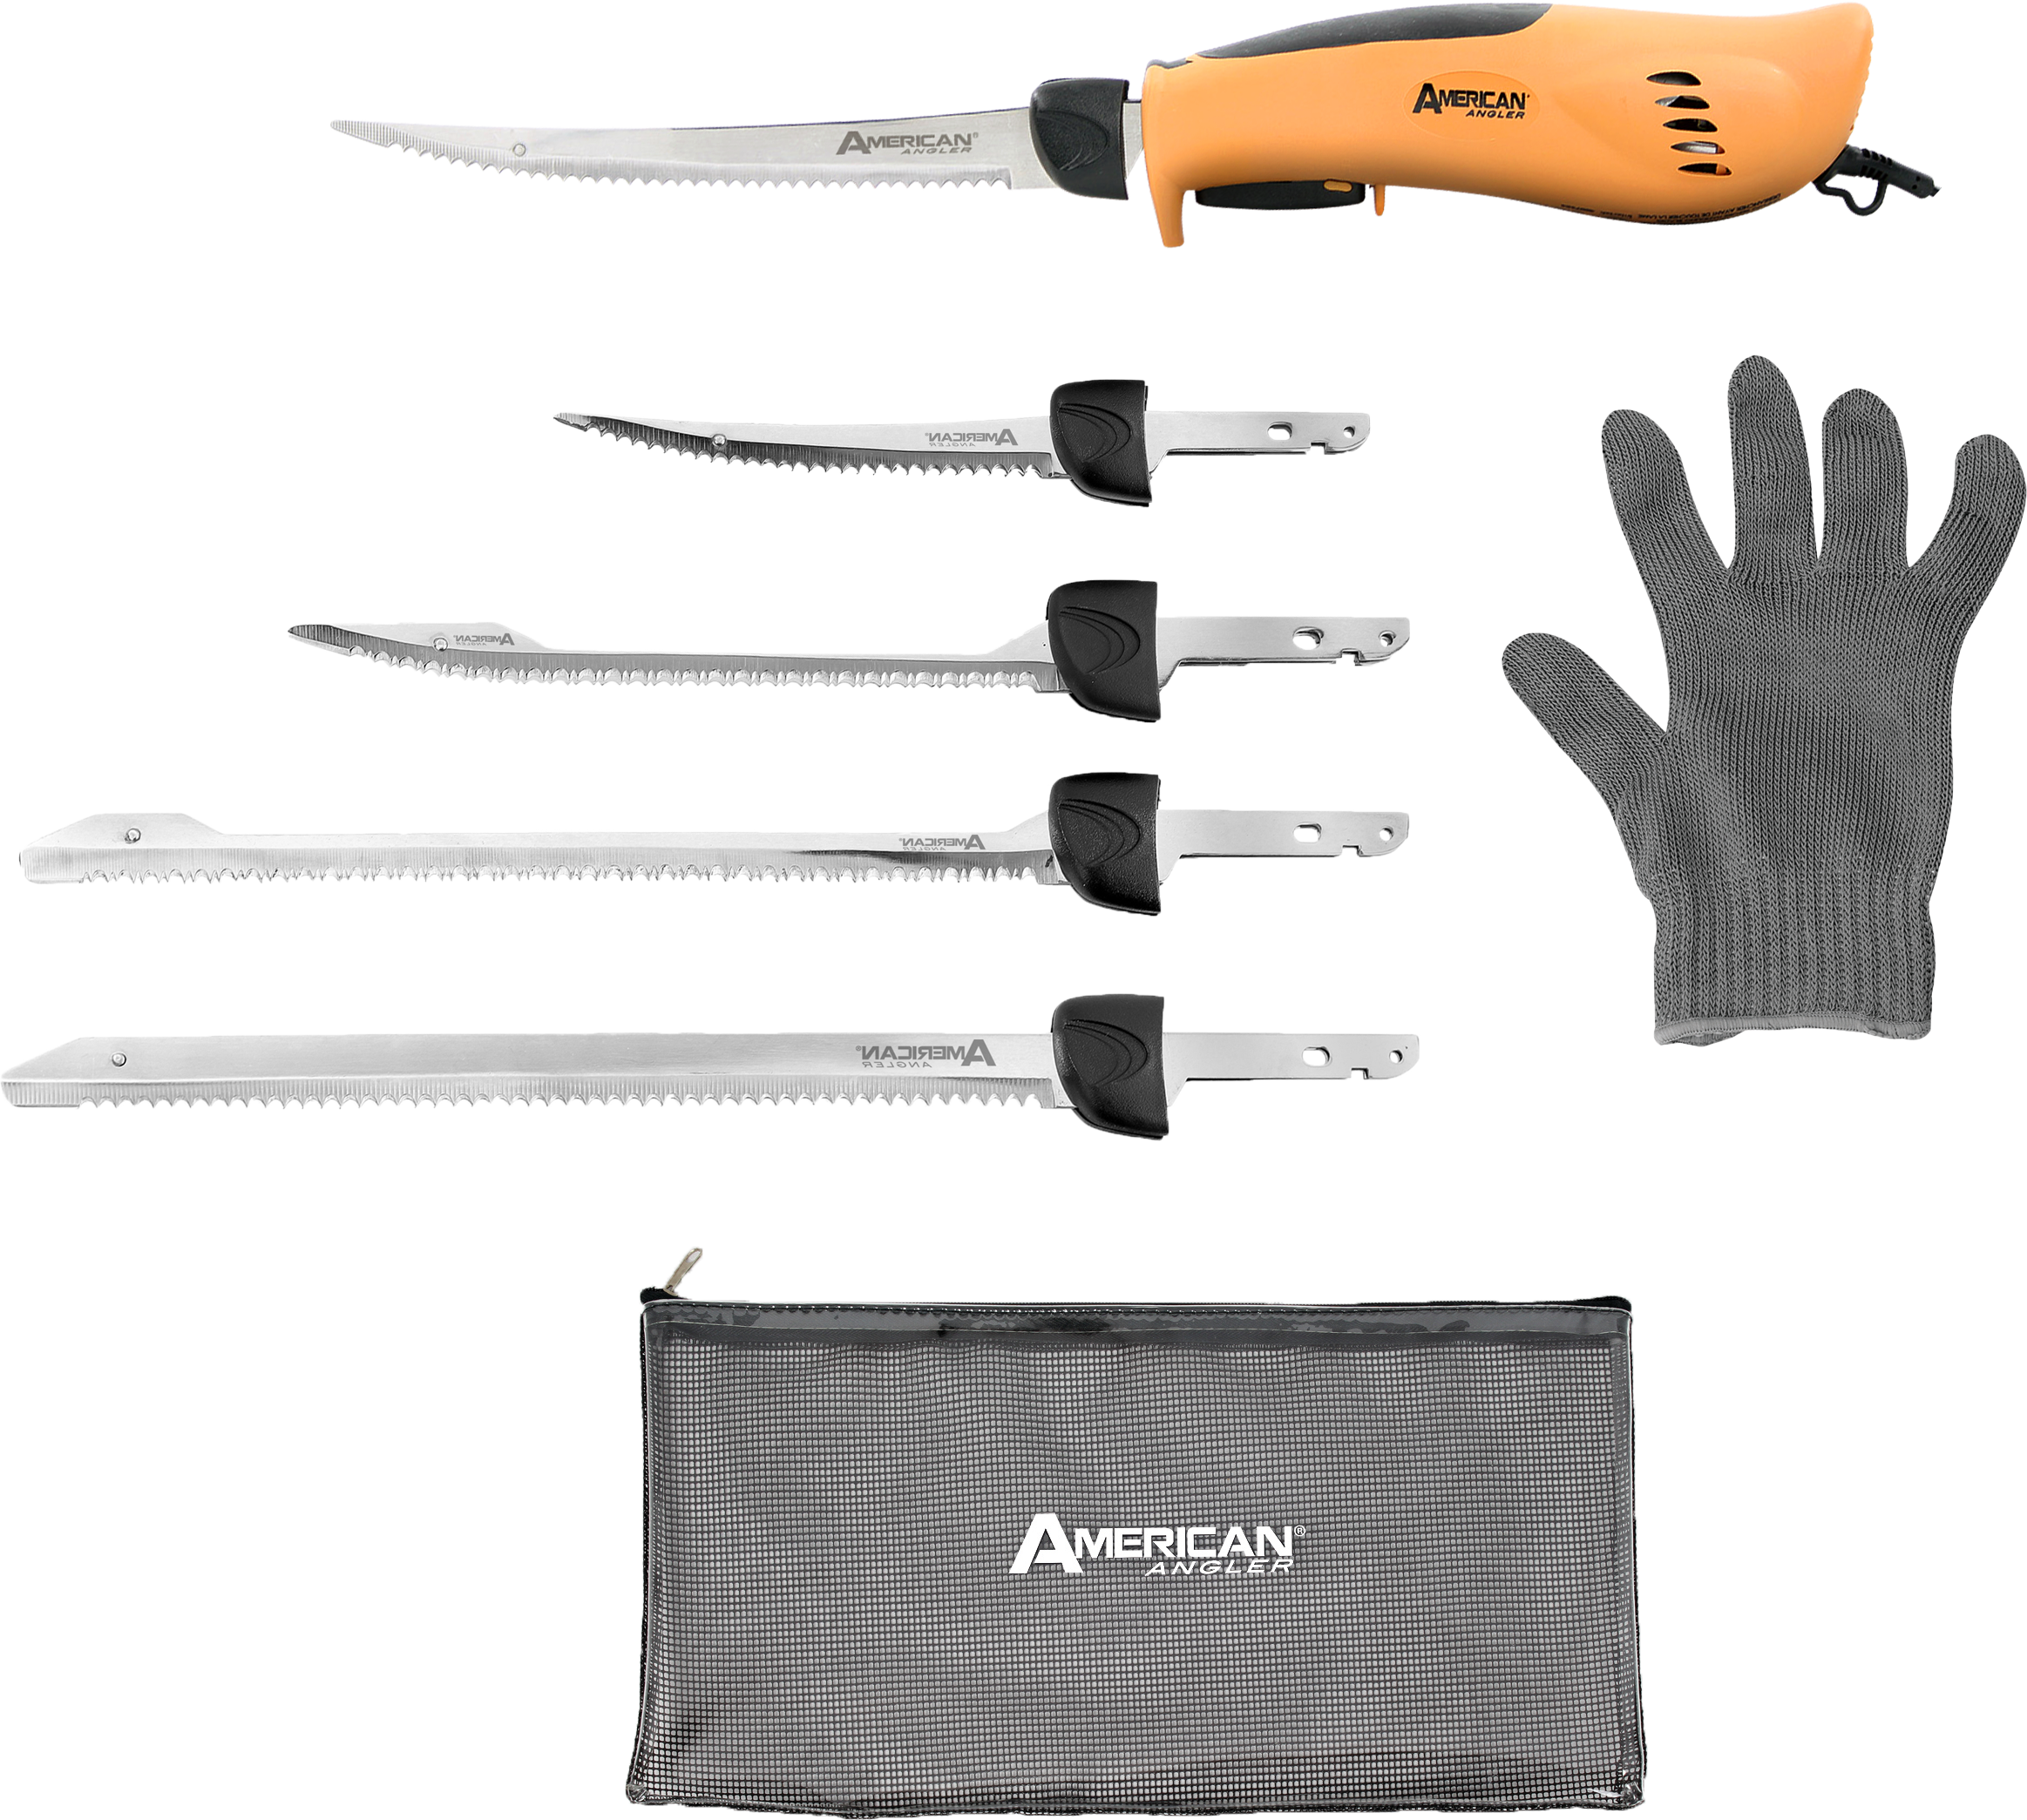 PRO Stainless Steel Electric Fillet Knife With 8” Freshwater Blade –  American Angler